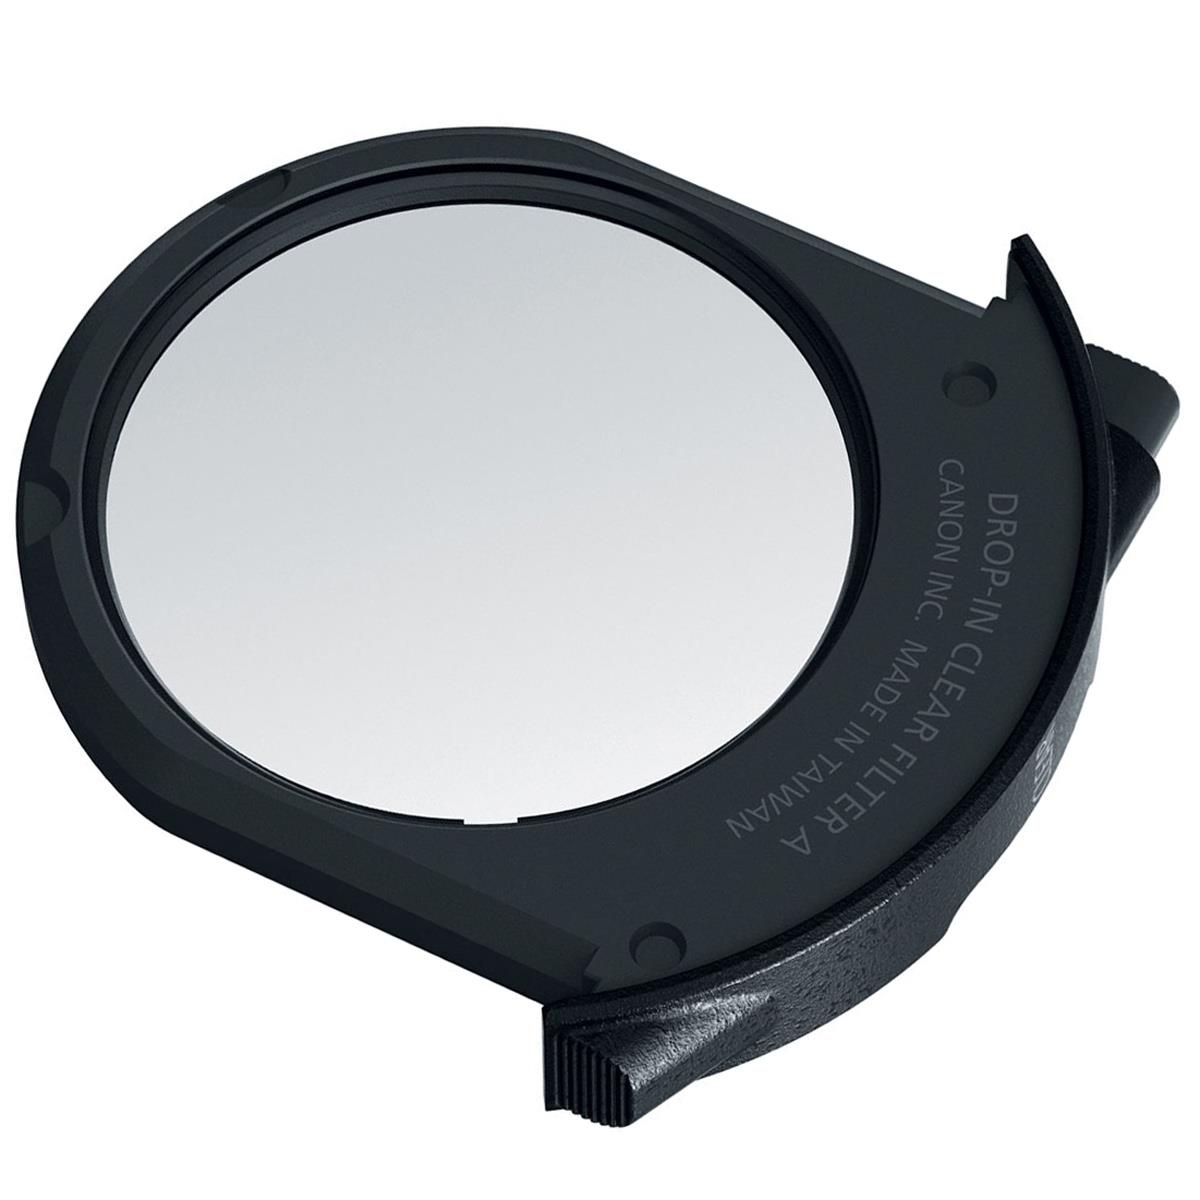 Canon Drop-In Clear Filter A for EF-EOS R Mount Adapter кольцо адаптер fotga mf для объектива canon eos ef 5d 7d 650d 600d